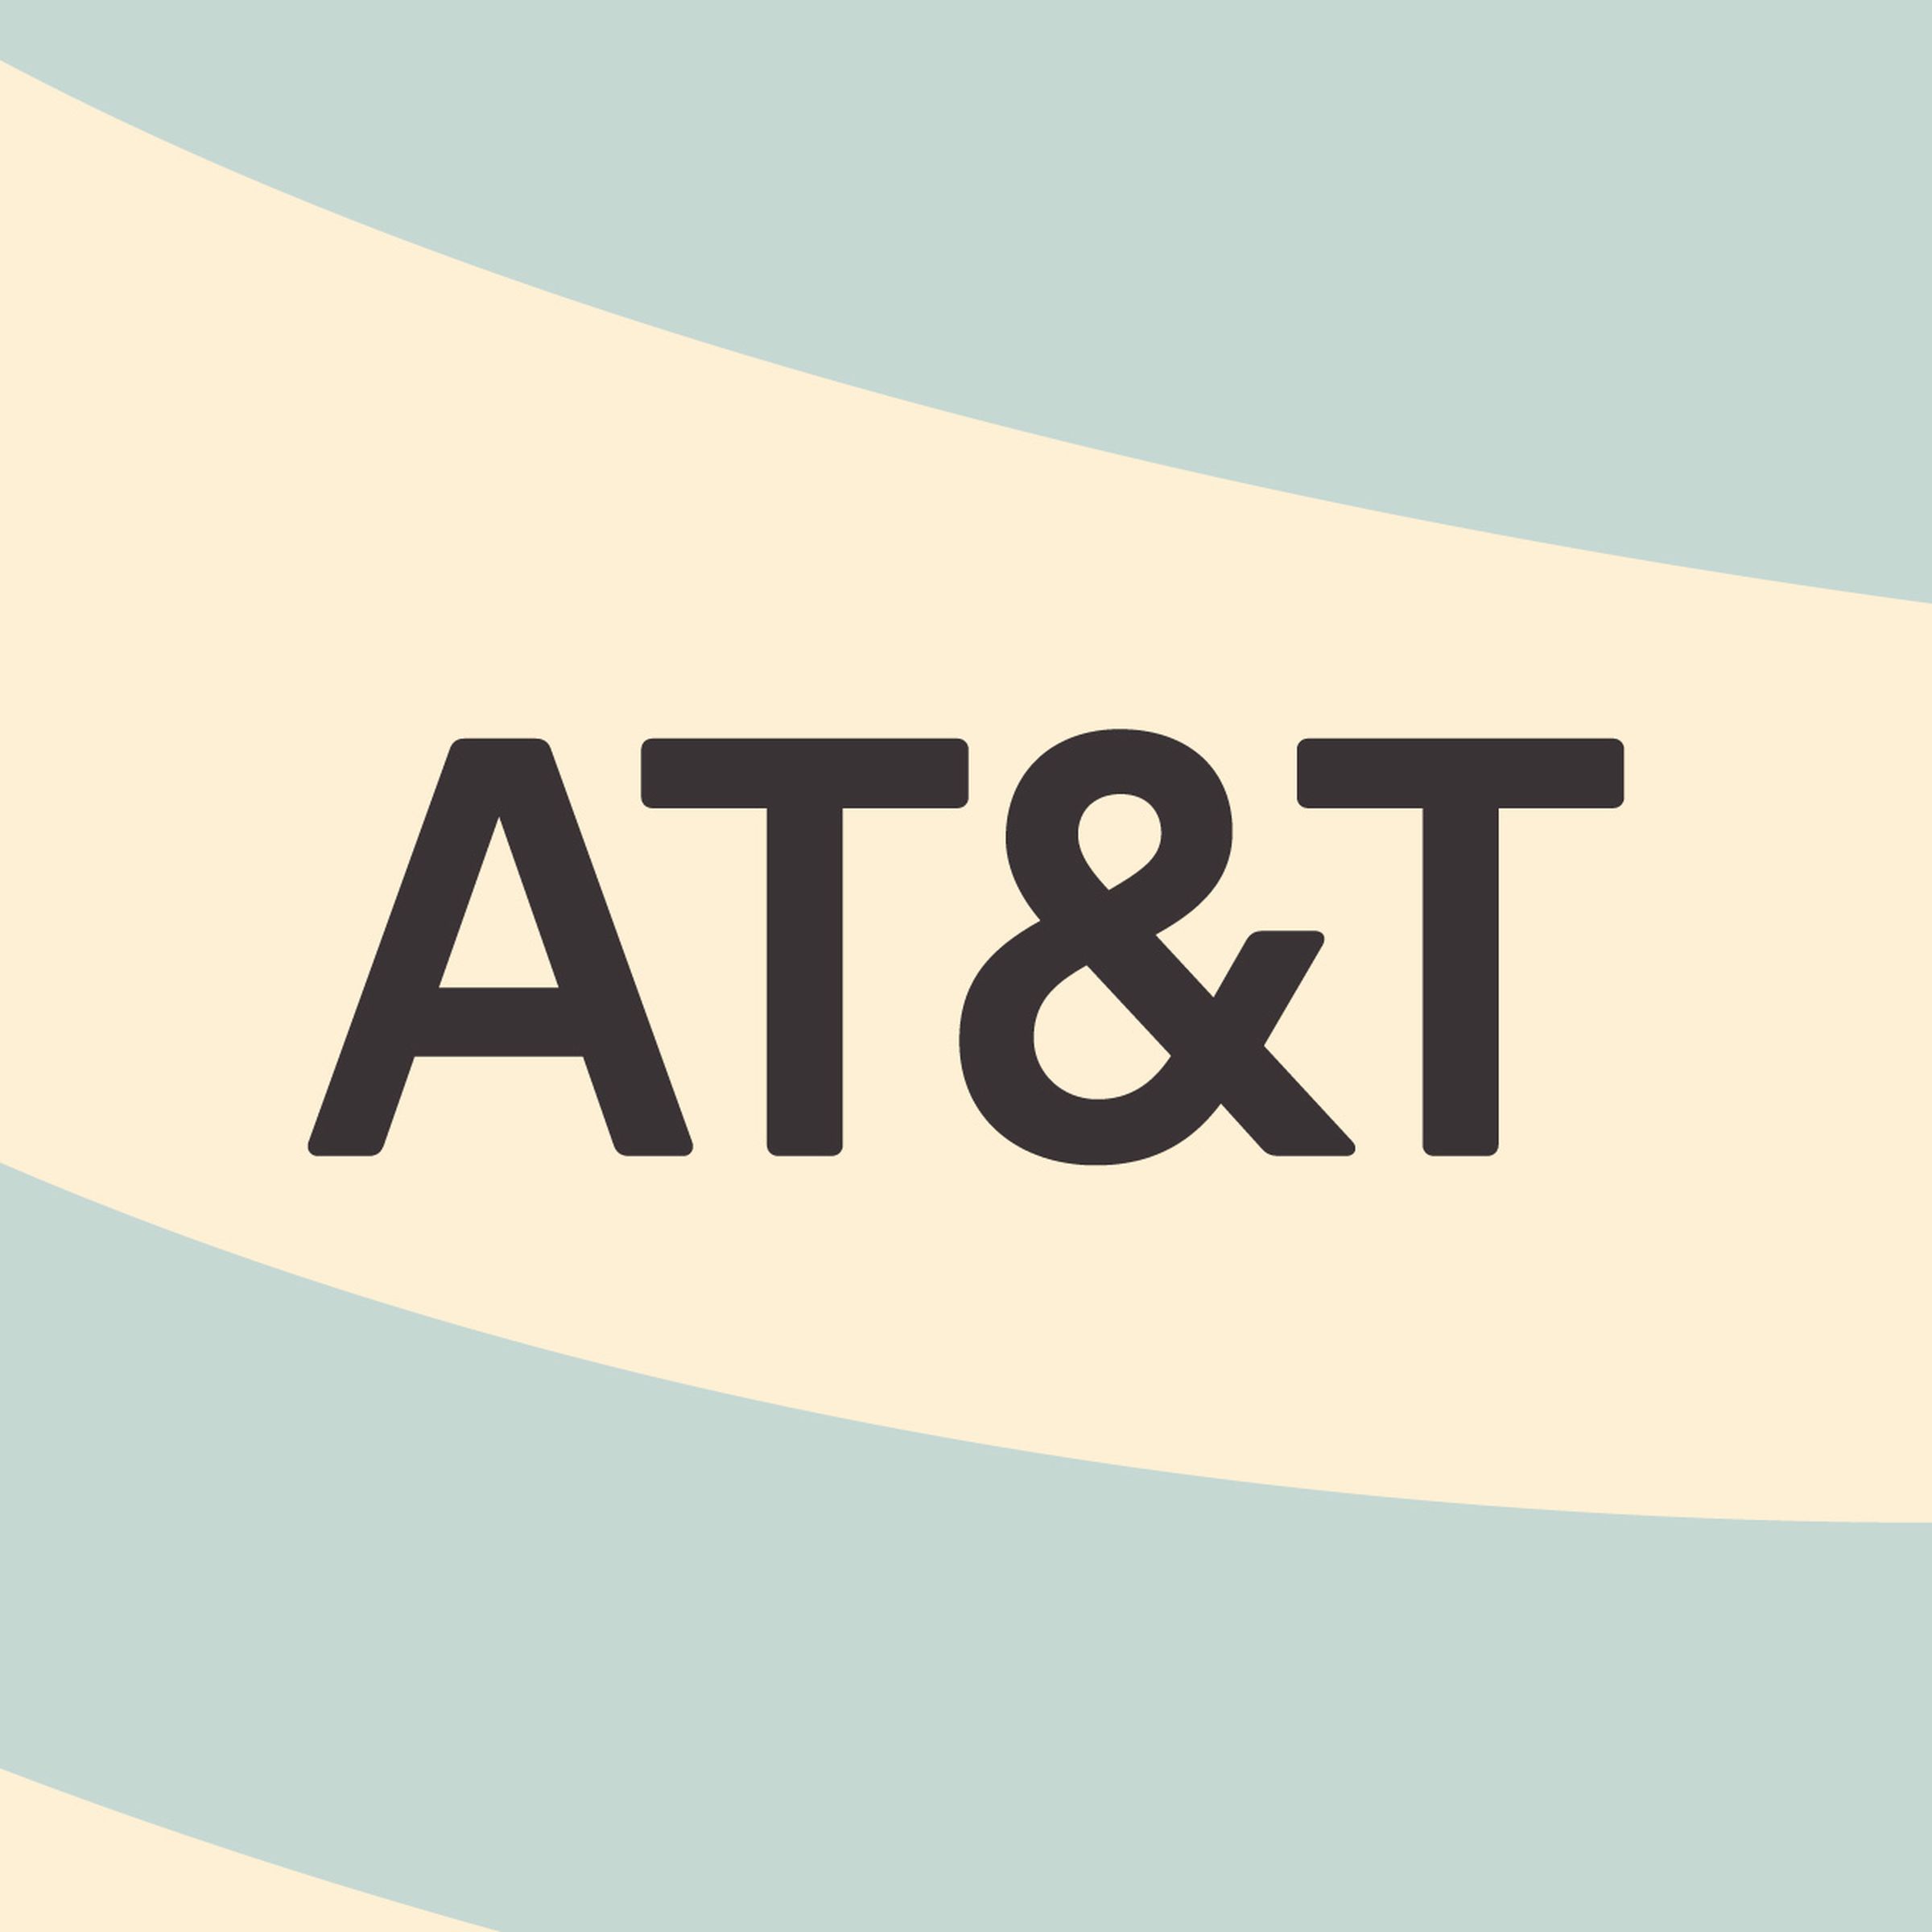 The text AT&amp;T logo on a light blue and tan background